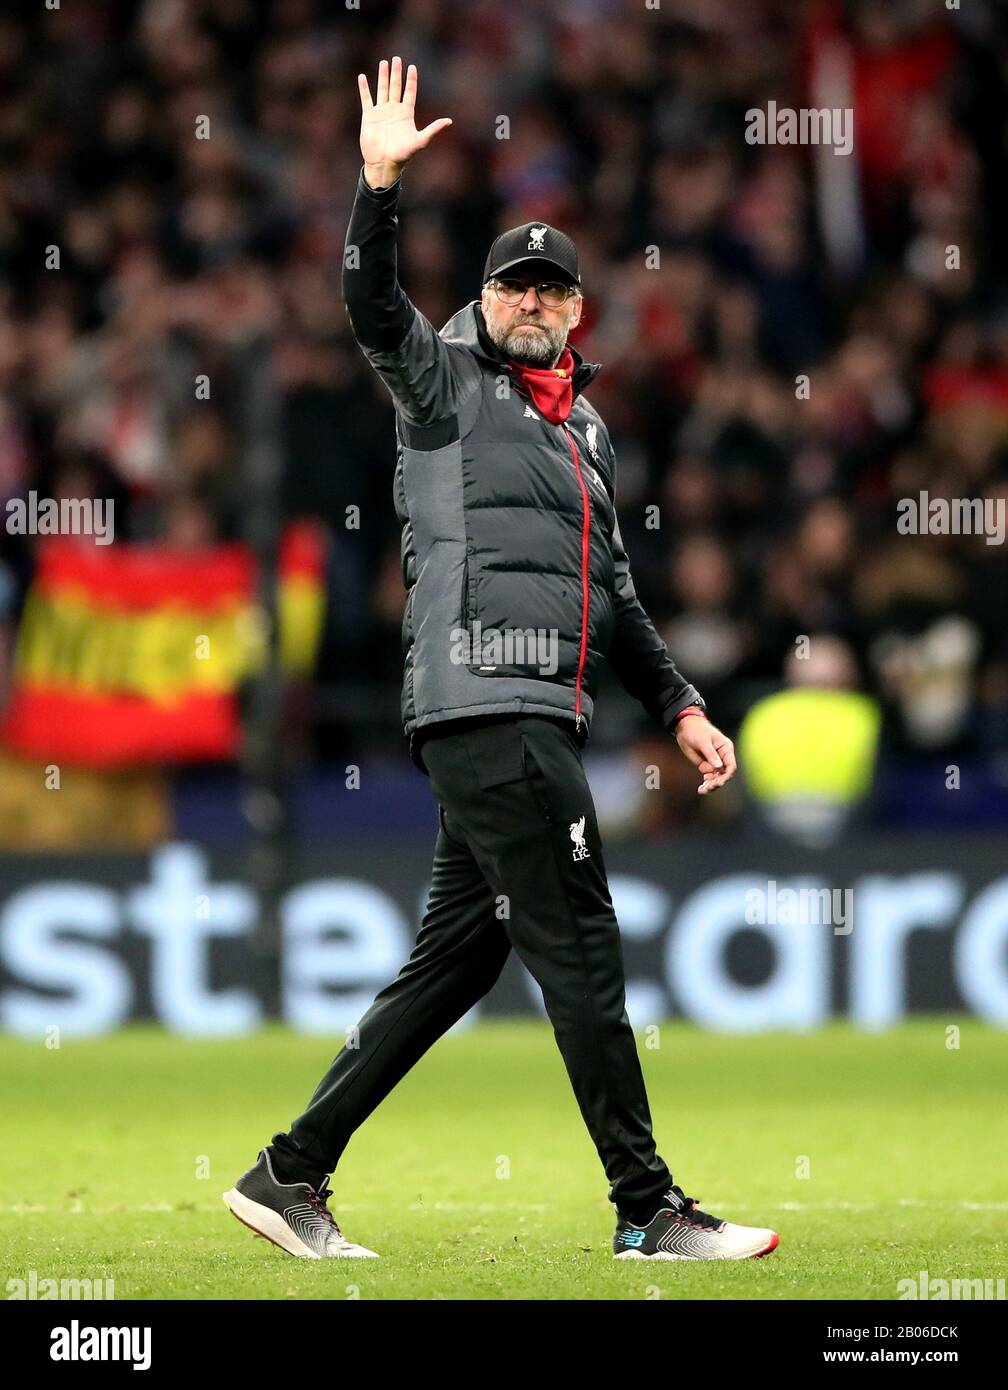 Liverpool manager Jurgen Klopp reacts after the final whistle during the UEFA Champions League round of 16 first leg match at Wanda Metropolitano, Madrid Stock Photo